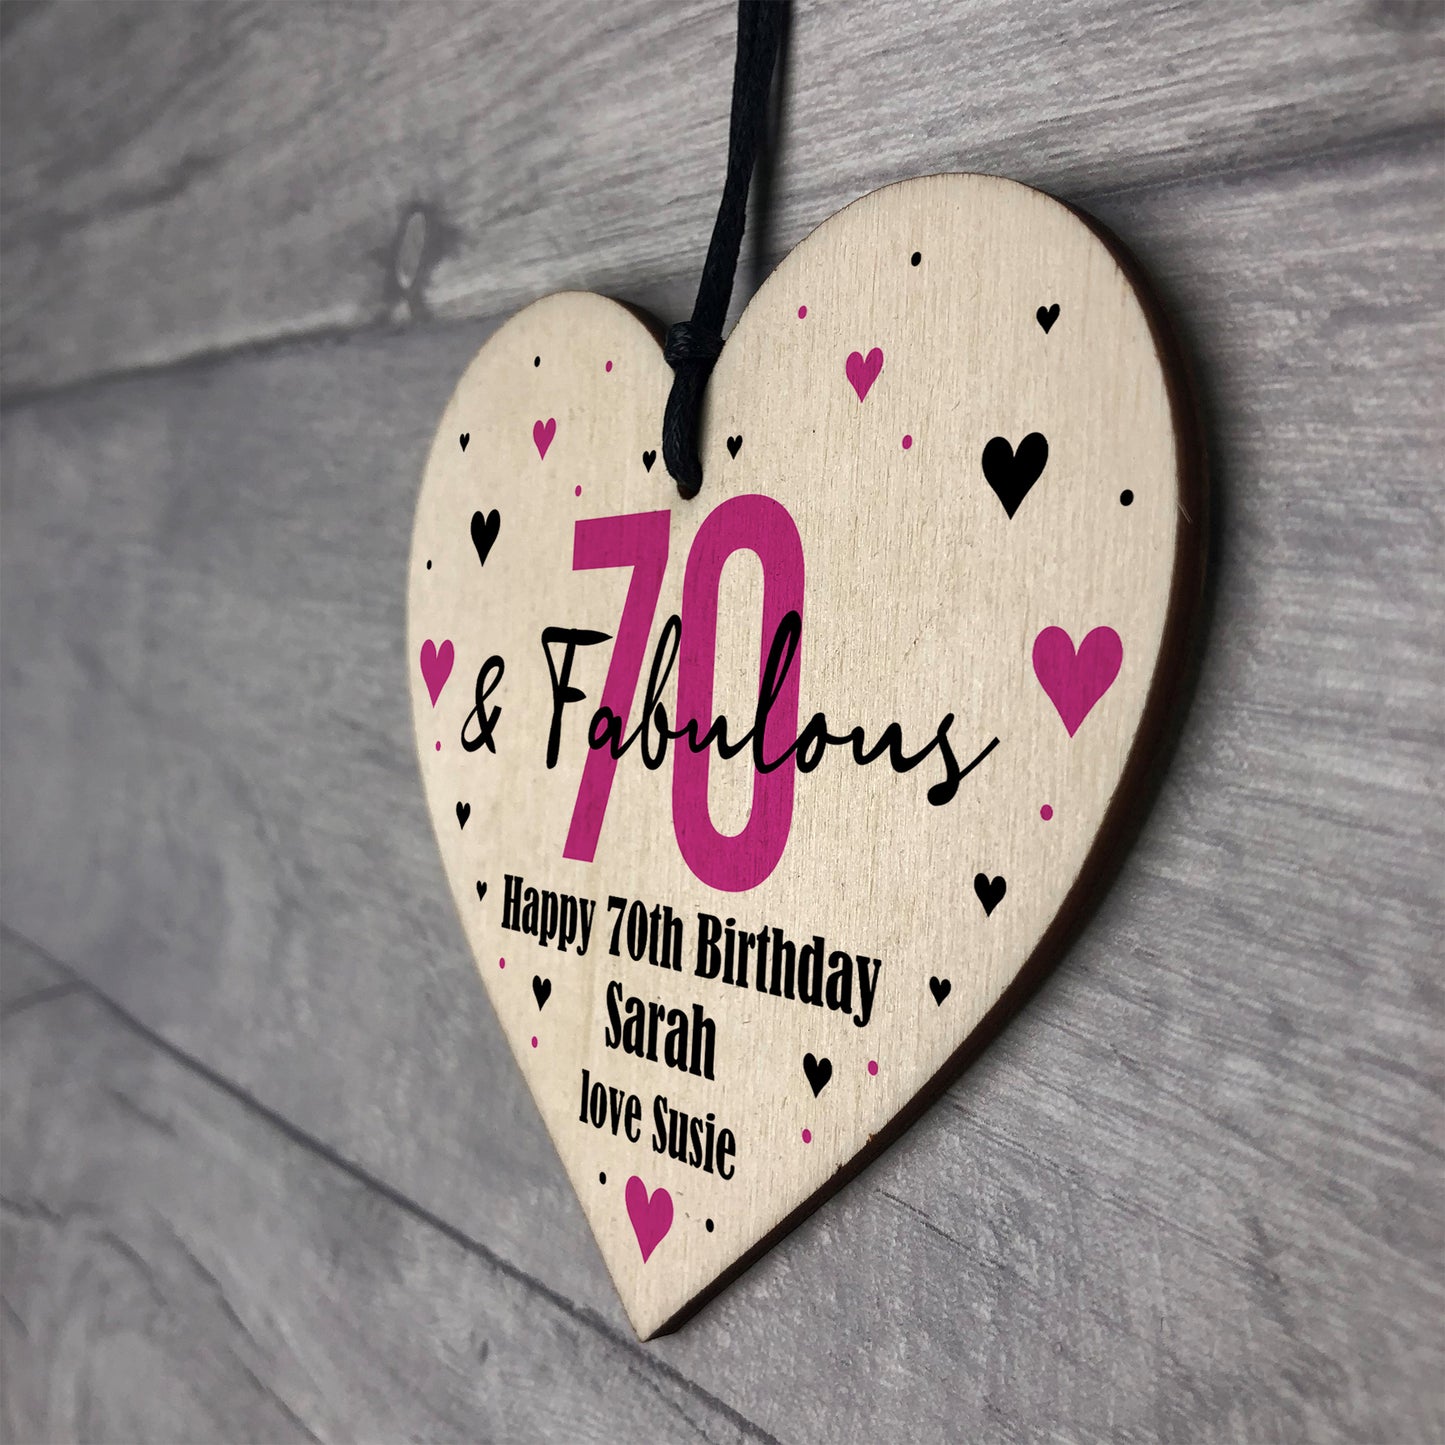 70 And Fabulous Gift Wood Heart Personalised 70th Birthday Gift